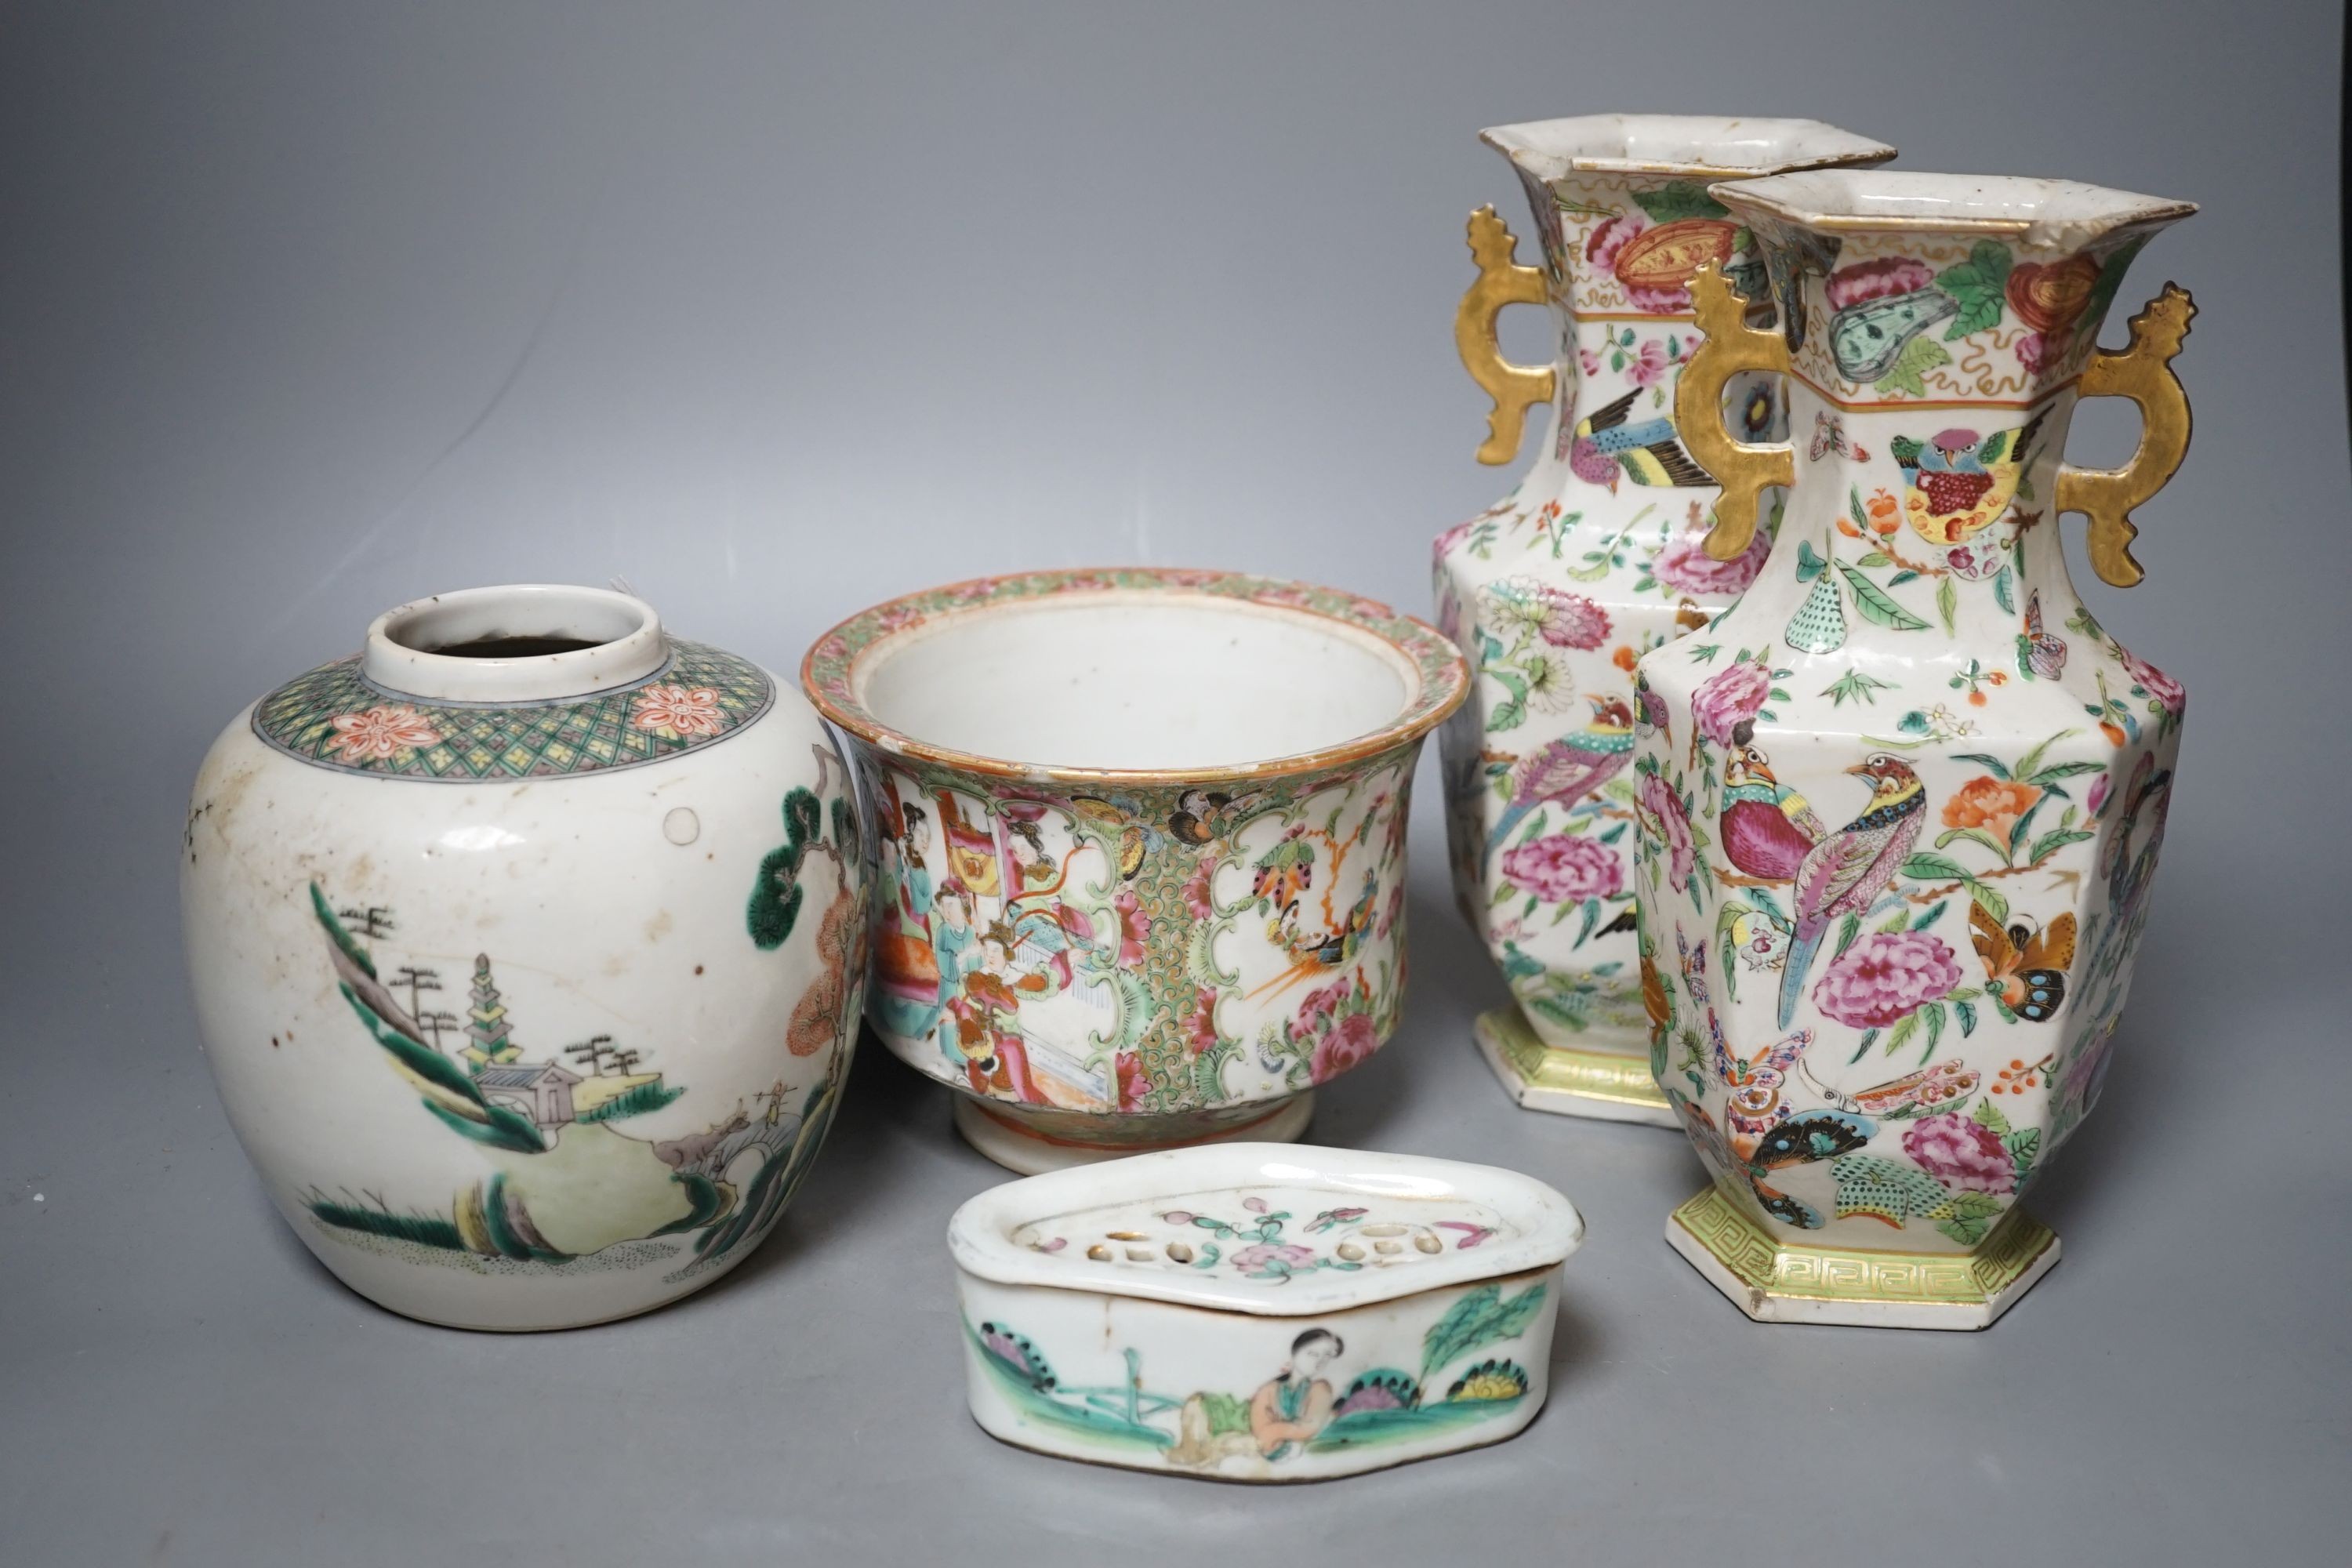 A group of 19th-century Chinese enamelled porcelain vessels, to include a jar, a pair of hexagonal vases, a pot and a cricket cage, Pair of vases 22cm high.